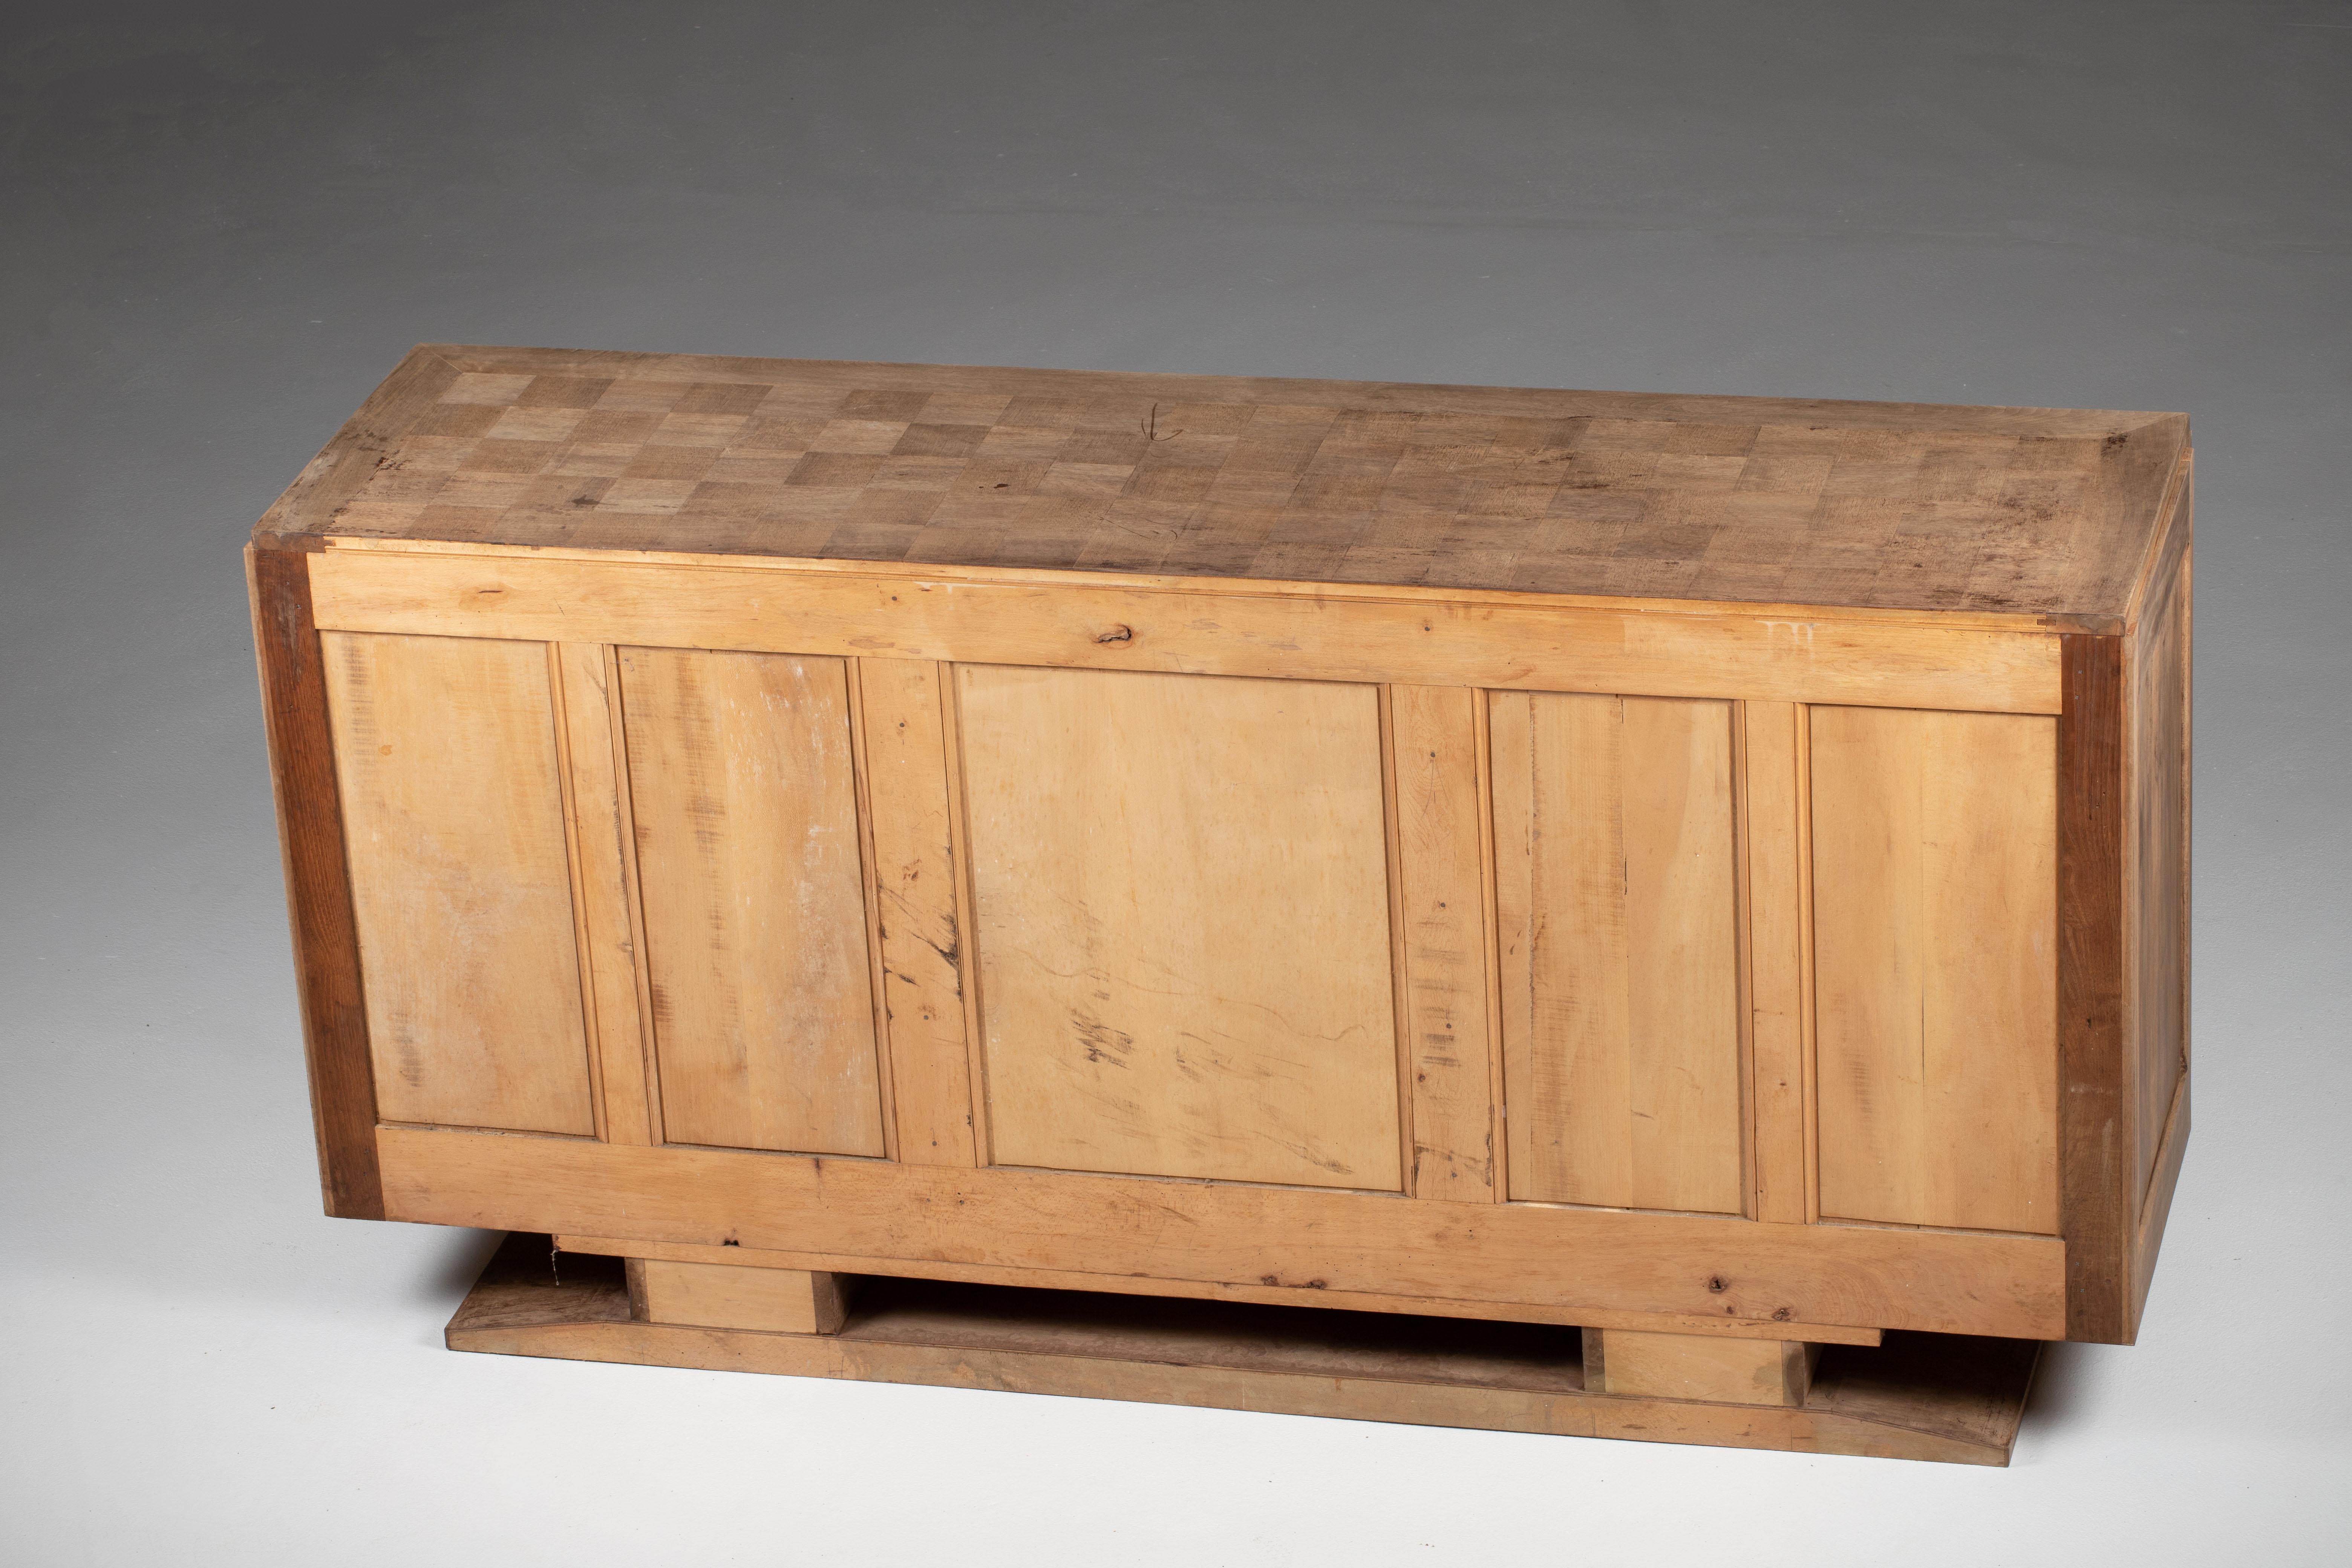 Bleached Art Deco Solid Oak Sideboard with Geometric Details, France, 1940s For Sale 13